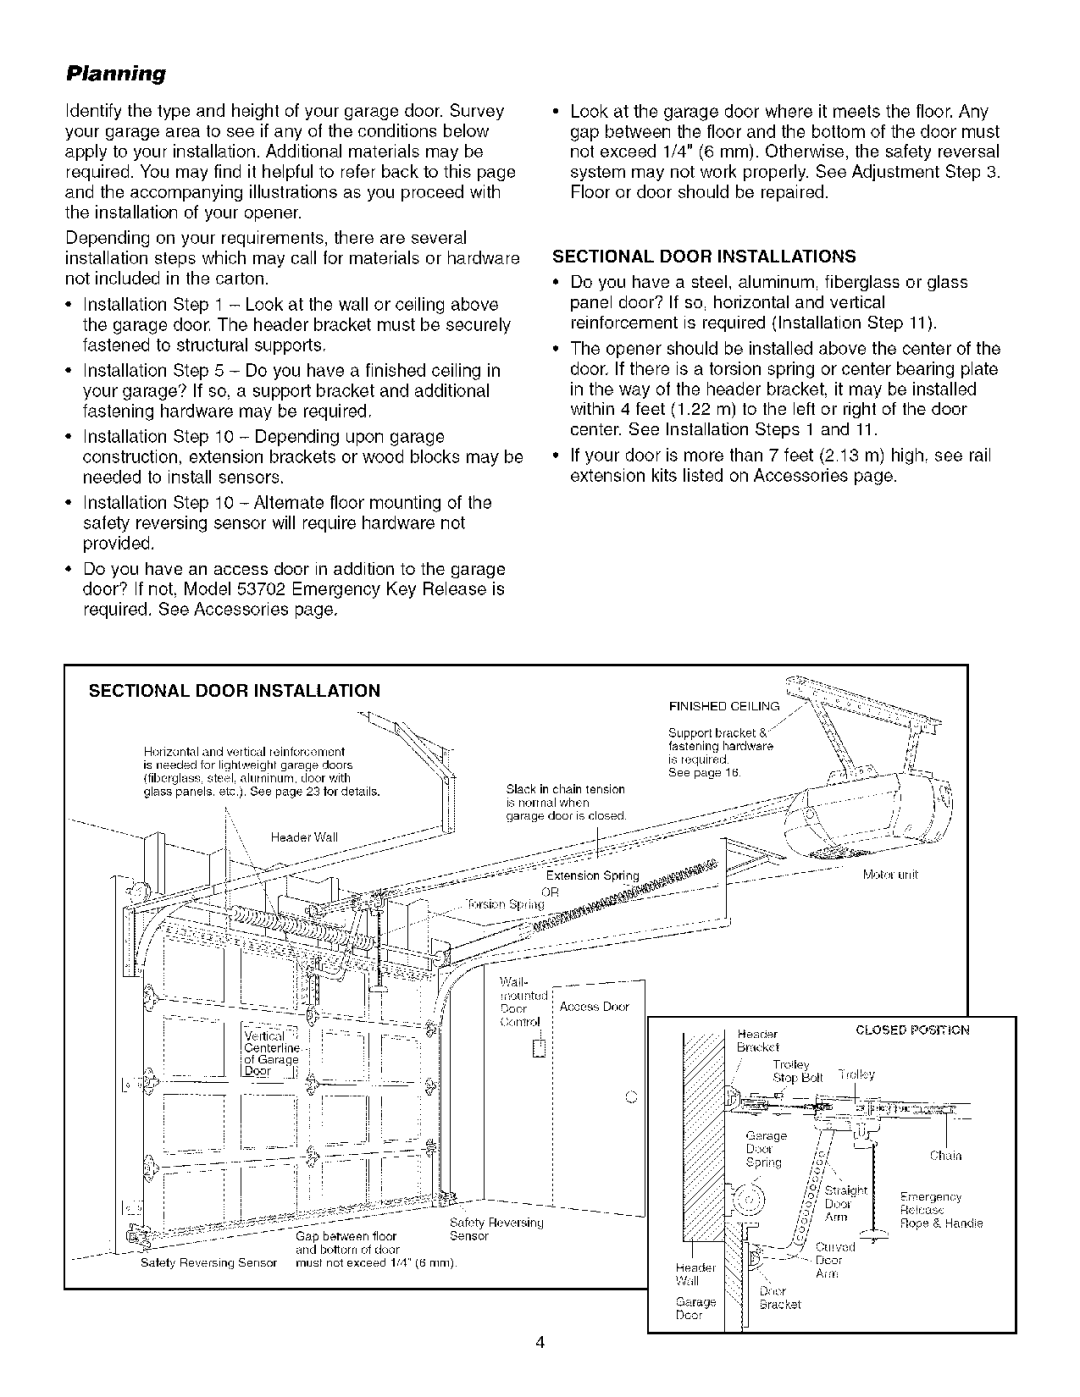 Sears 139.53930D owner manual Planning, Sectional Door Installations 